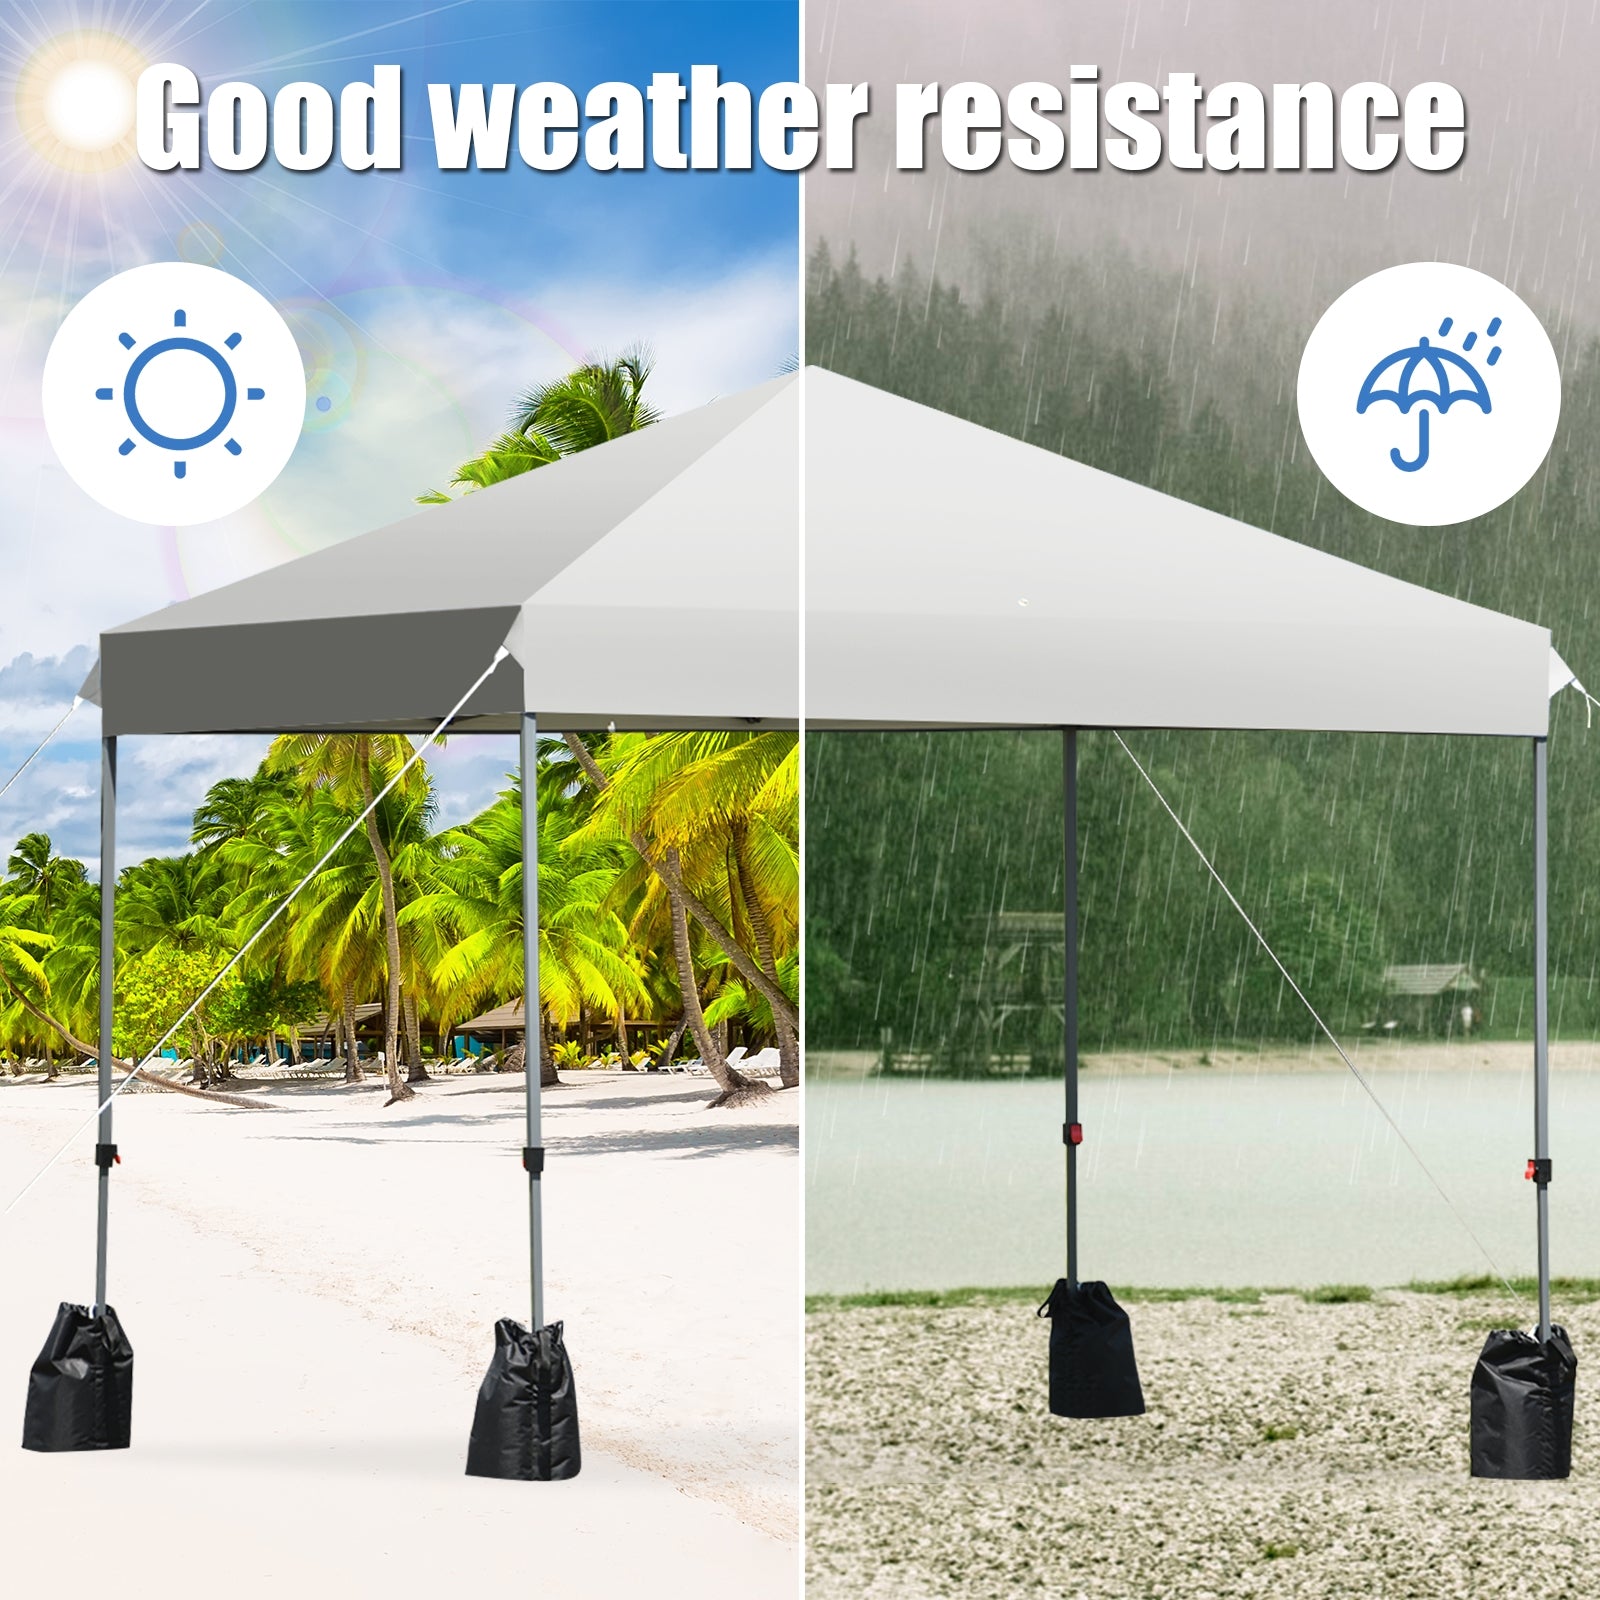 High-Quality Canopy Material: The top cloth of the canopy is made from thickened fabric with a special coating, offering sun protection and water resistance. It is also flame-retardant and holds the CPAI-84 certification for added safety.